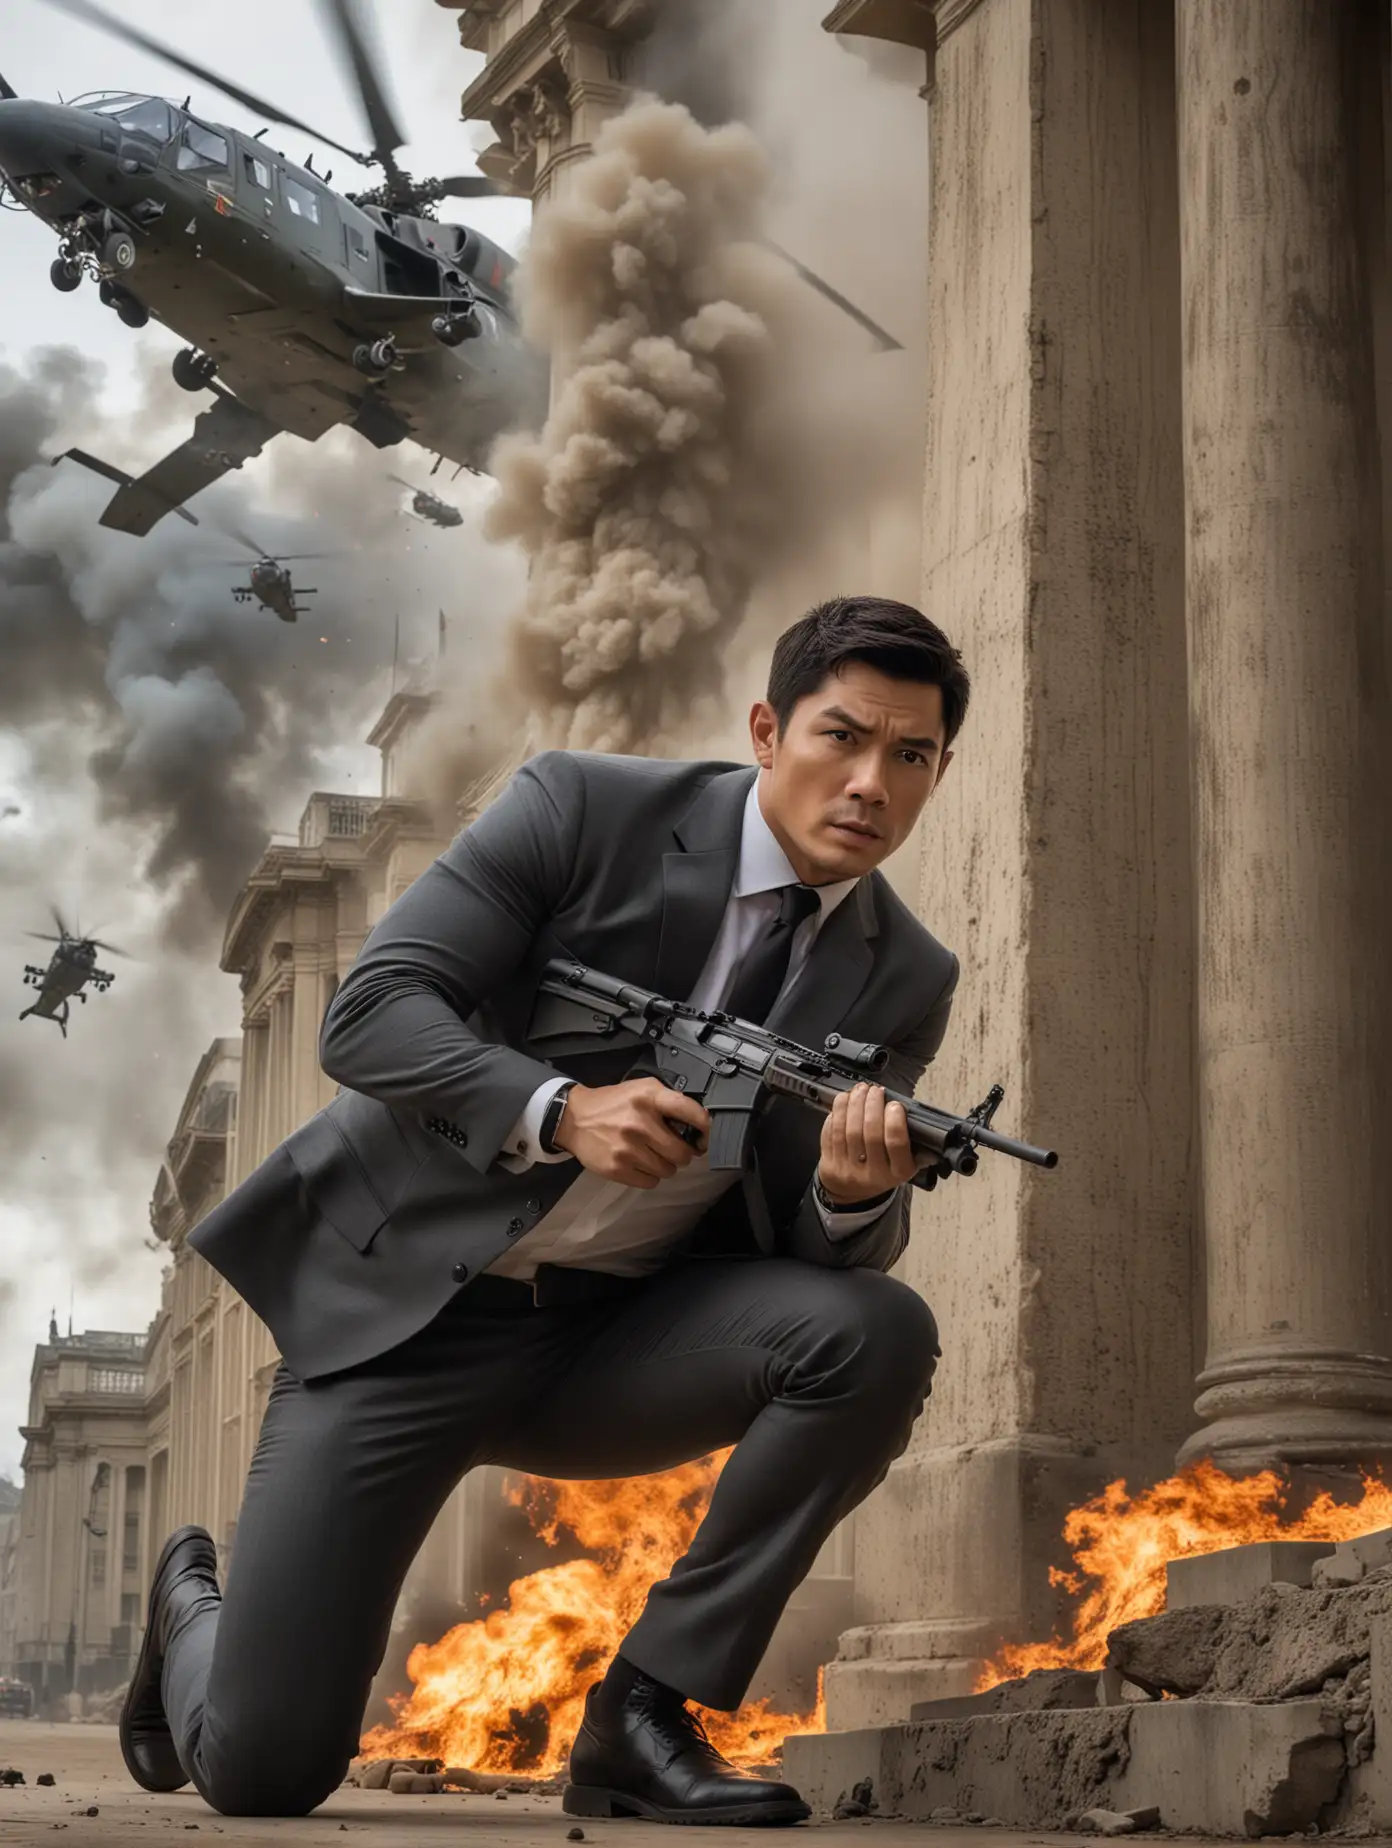 Henry Golding as james bond holding a pistol in a movie poster crouching and taking cover behind a pillar as a military helicopter fires rapidly at him.